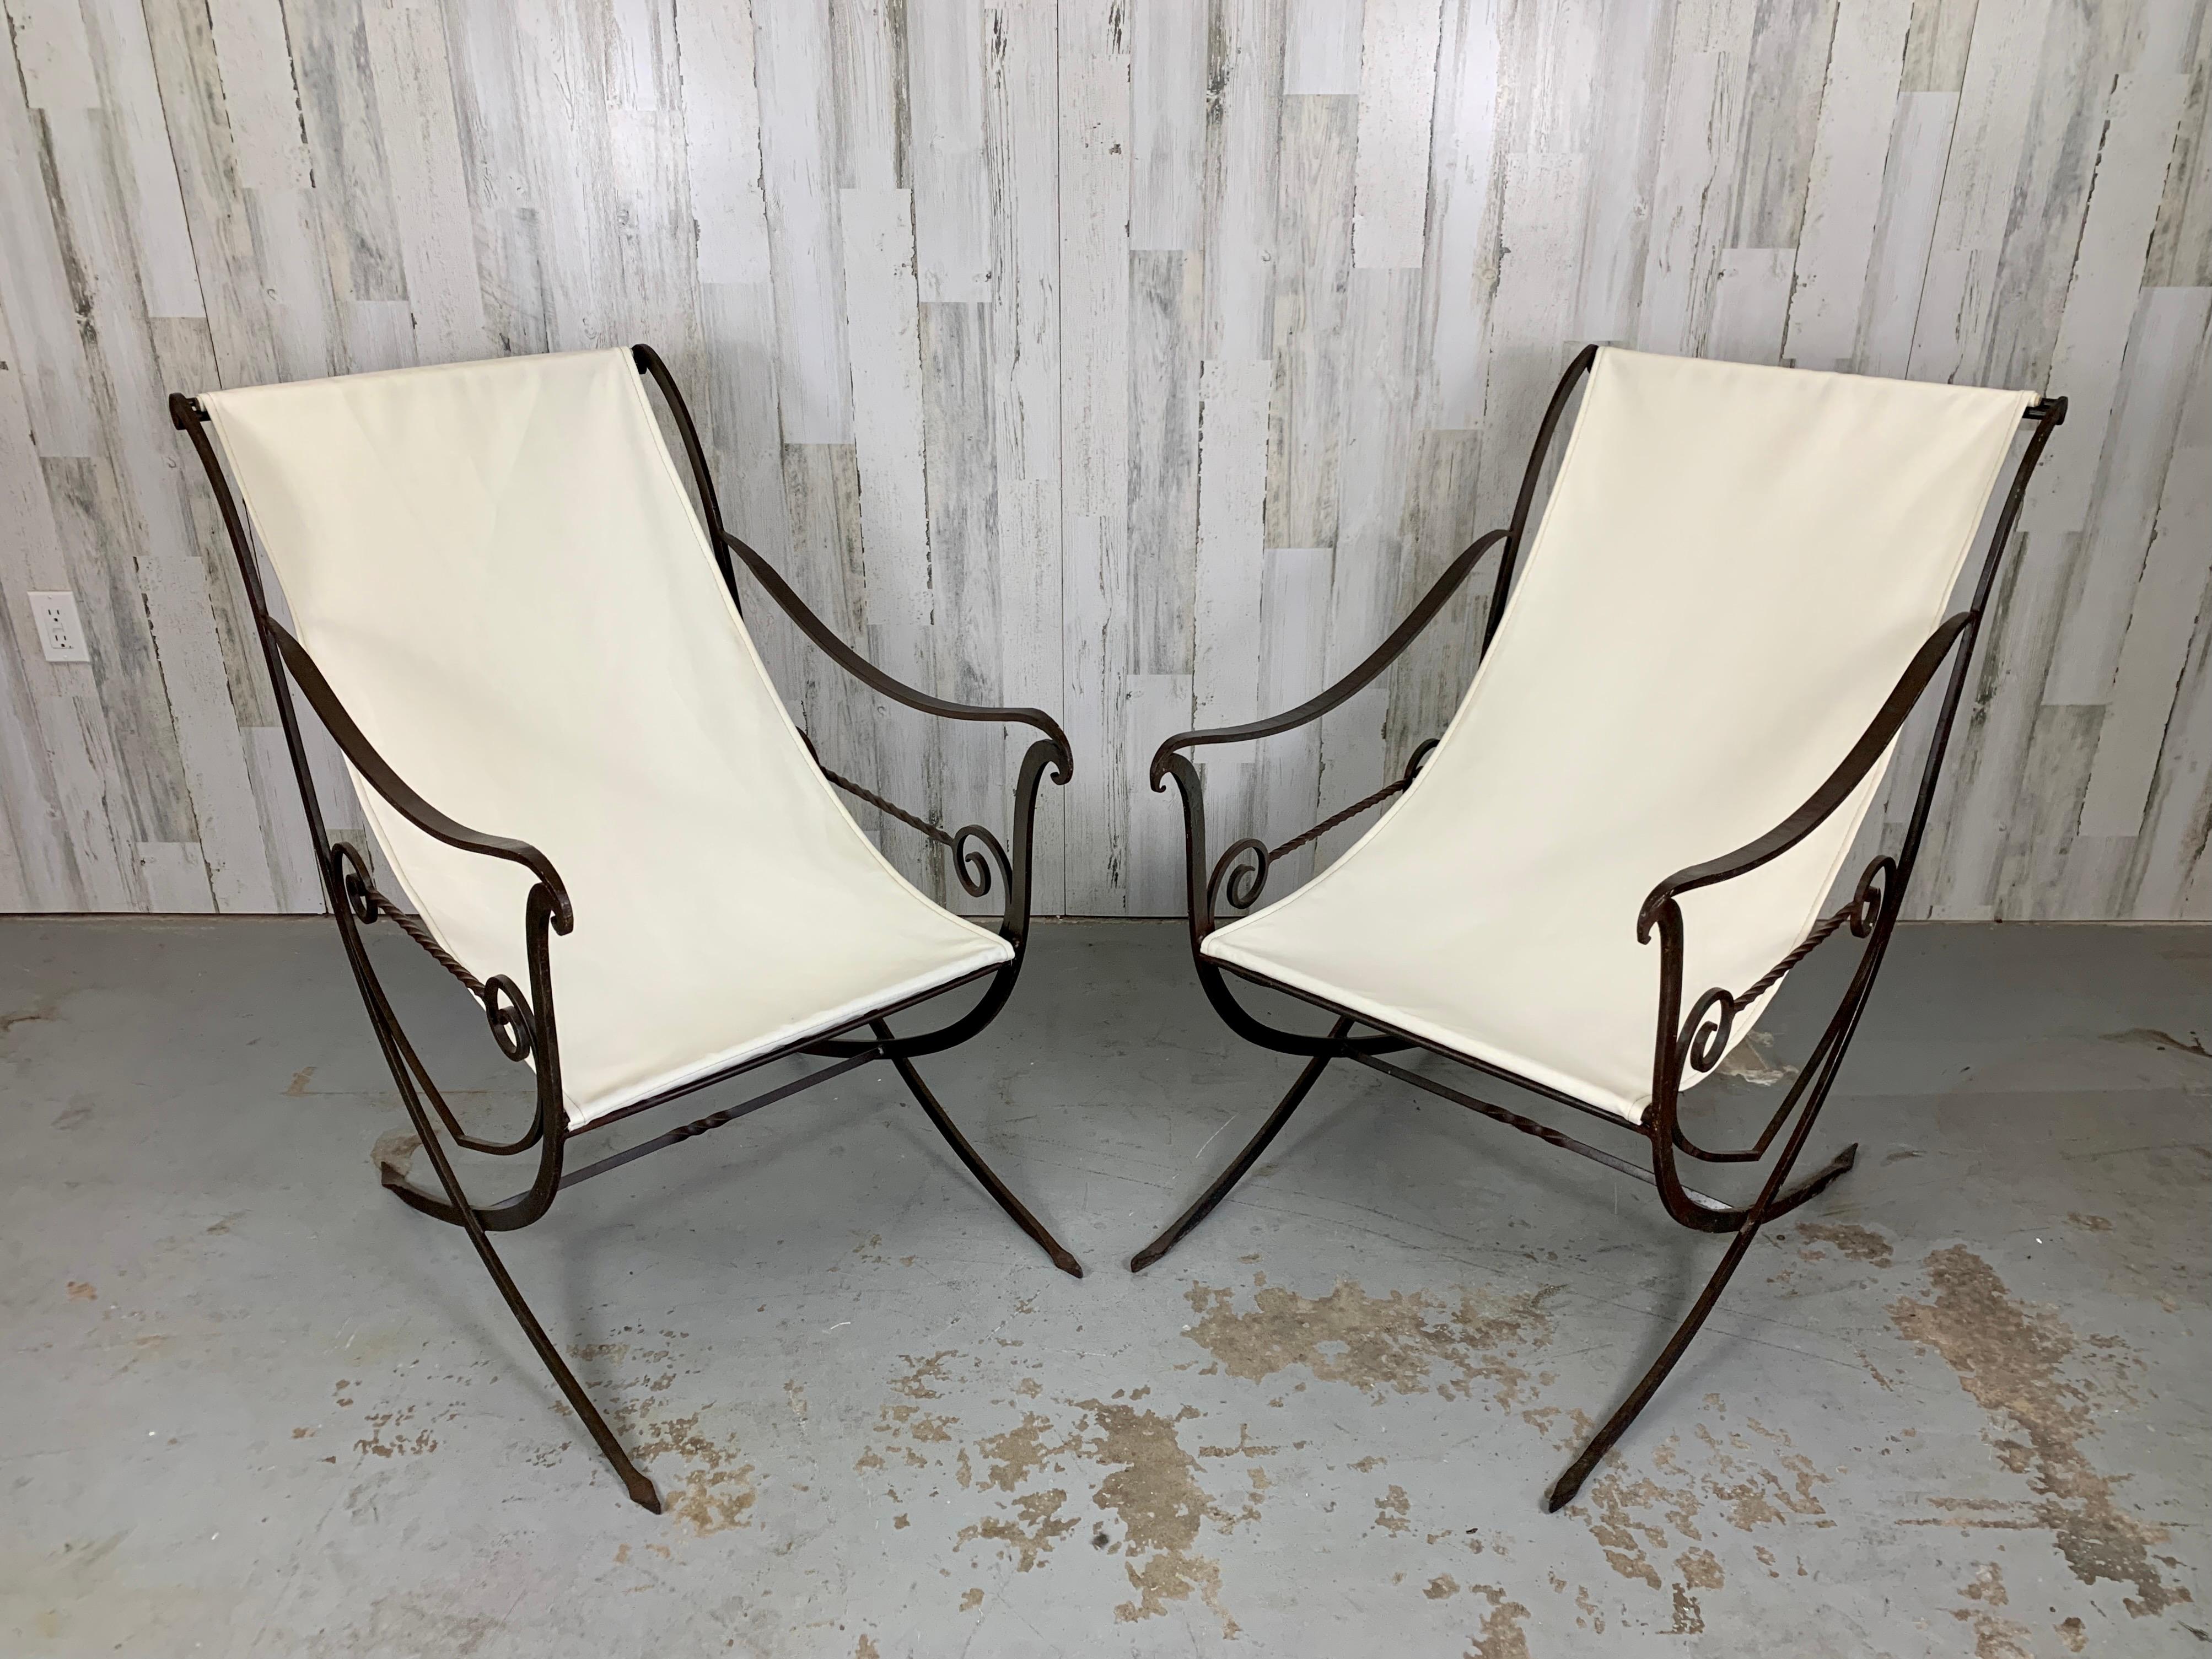 20th Century Sculpted Forged Iron Sling Chairs, 1940's For Sale